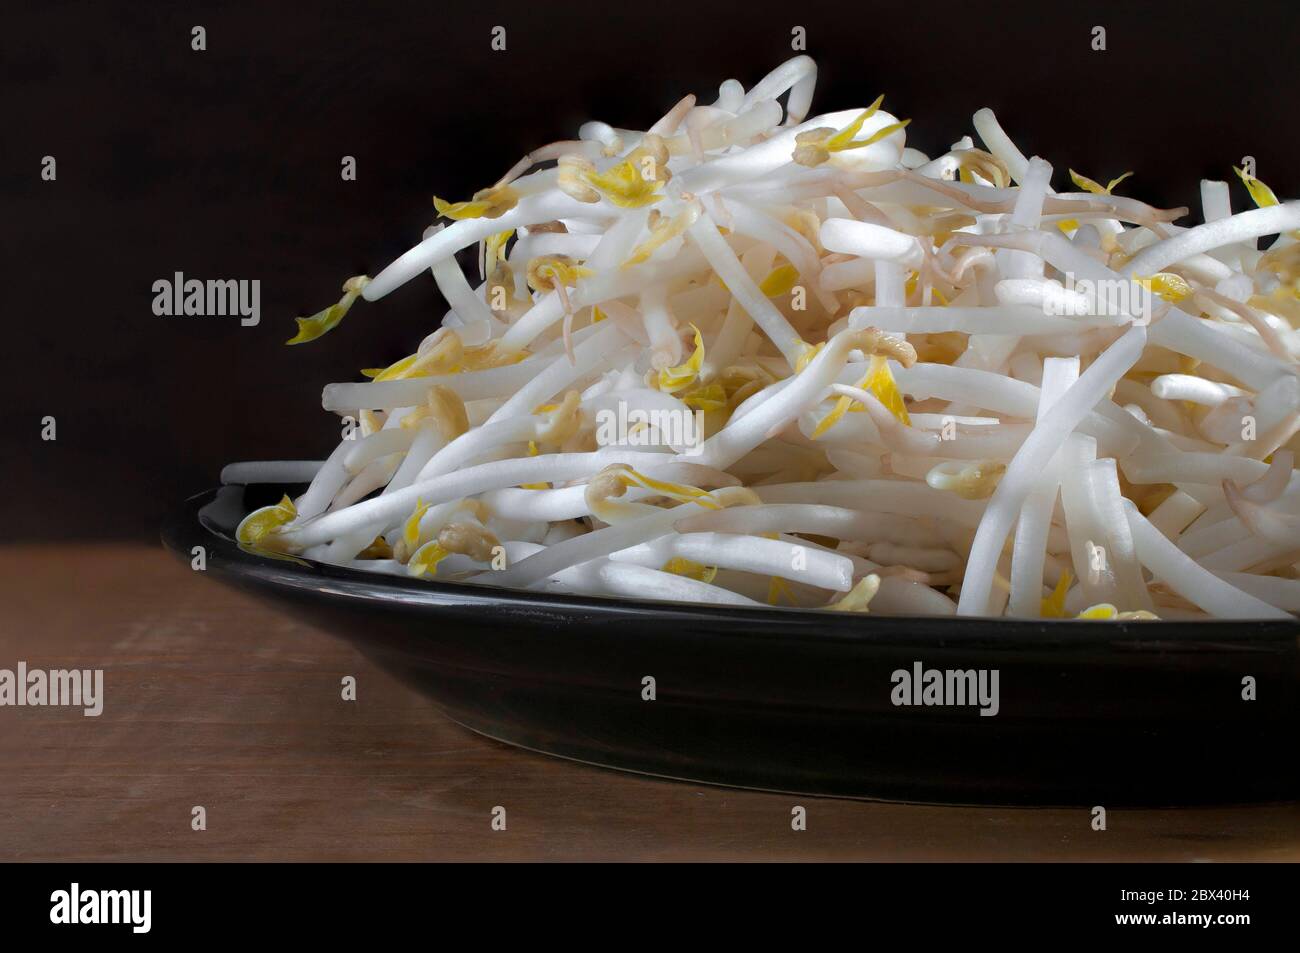 Raw Sprouted mung bean in a black plate and a black background on a wooden table. Ingredient to make Chop suey Stock Photo